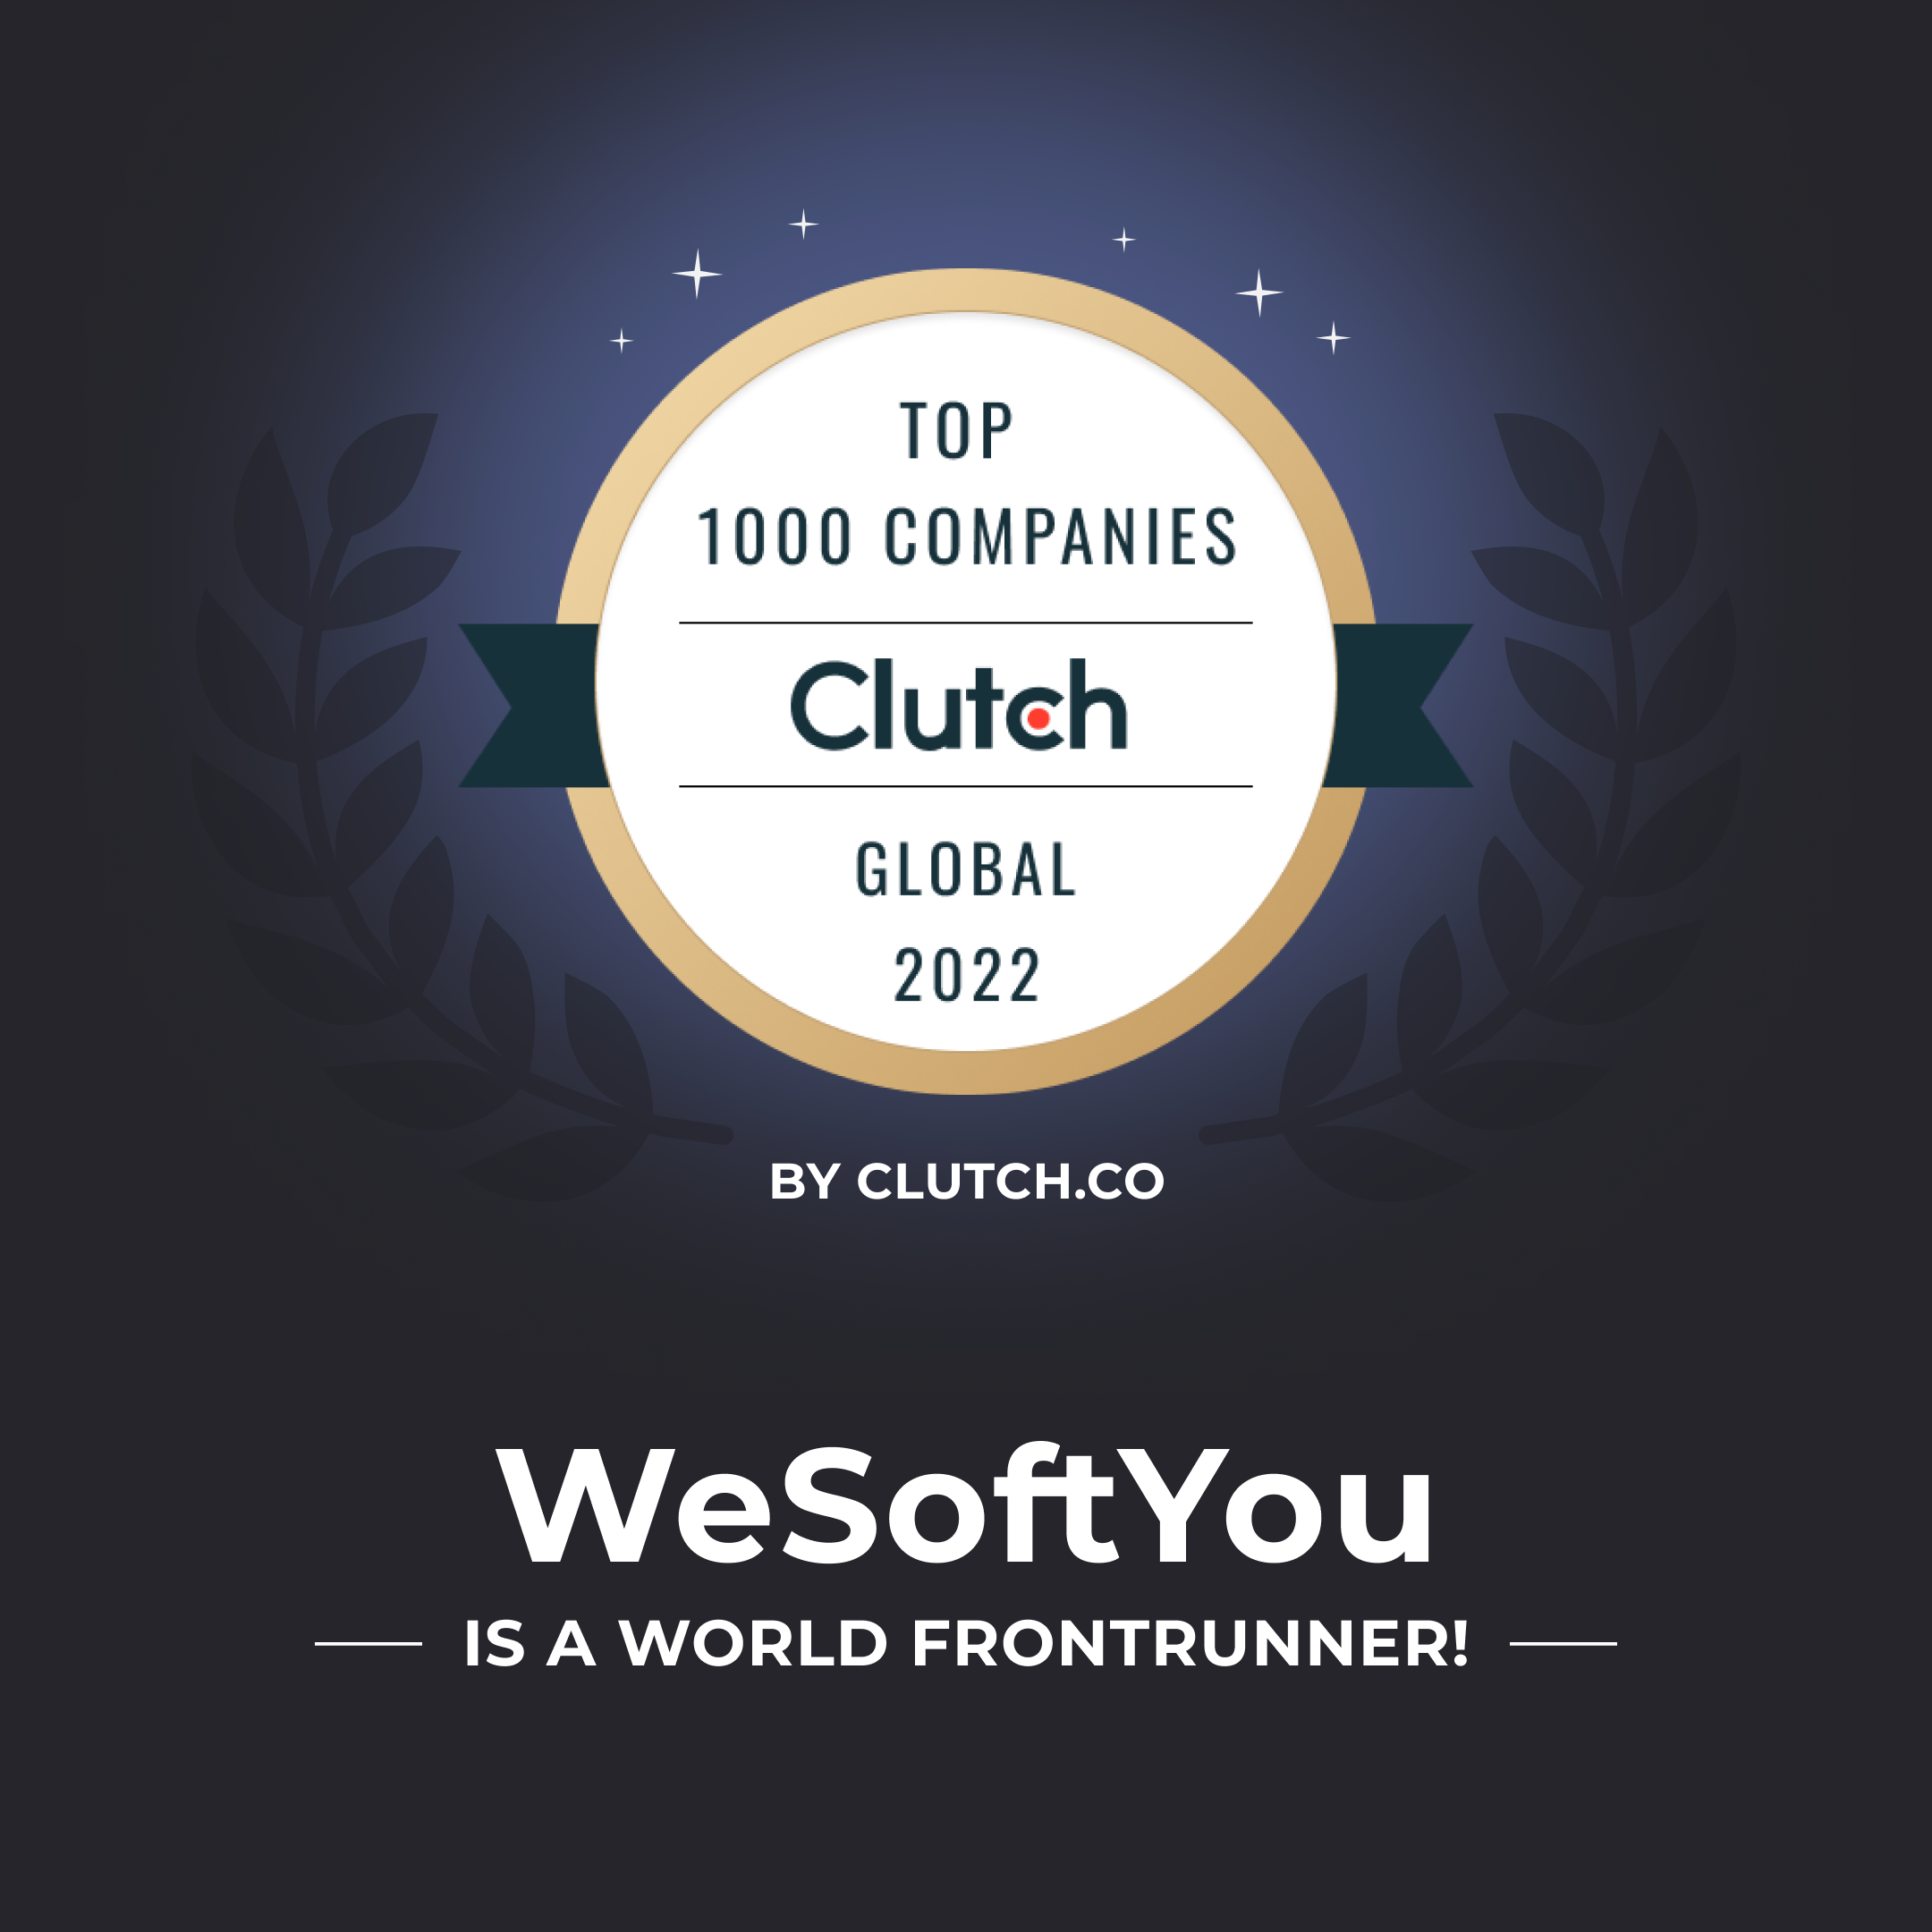 WSU is a world Frontrunner – Top 1% in the world by Clutch